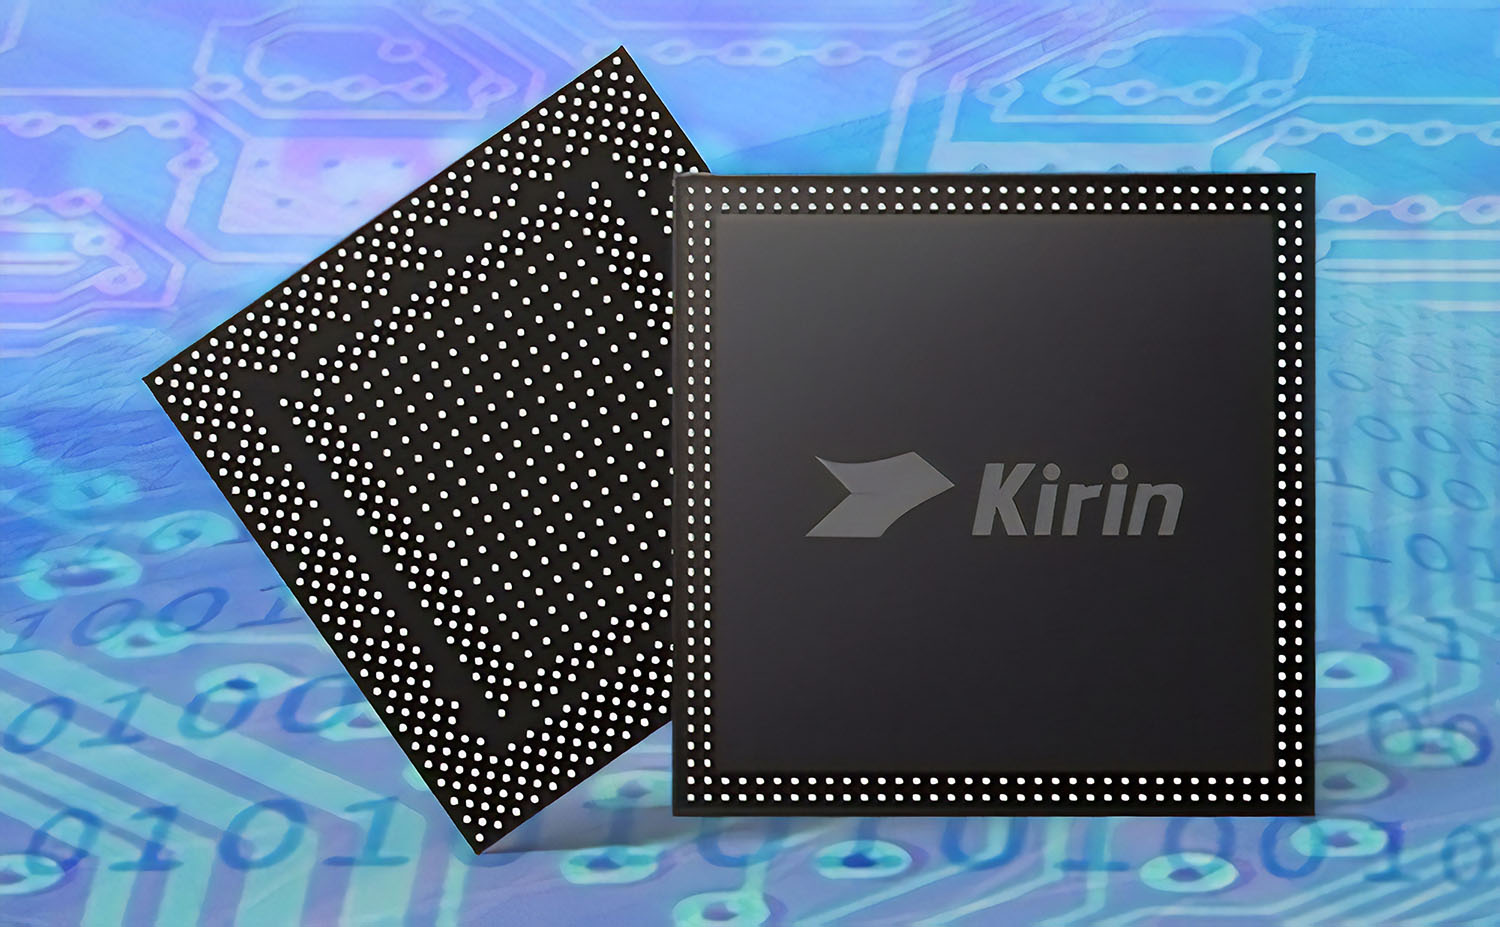 Huawei is all set to release Mate 20 series with improved Kirin 980 SoC